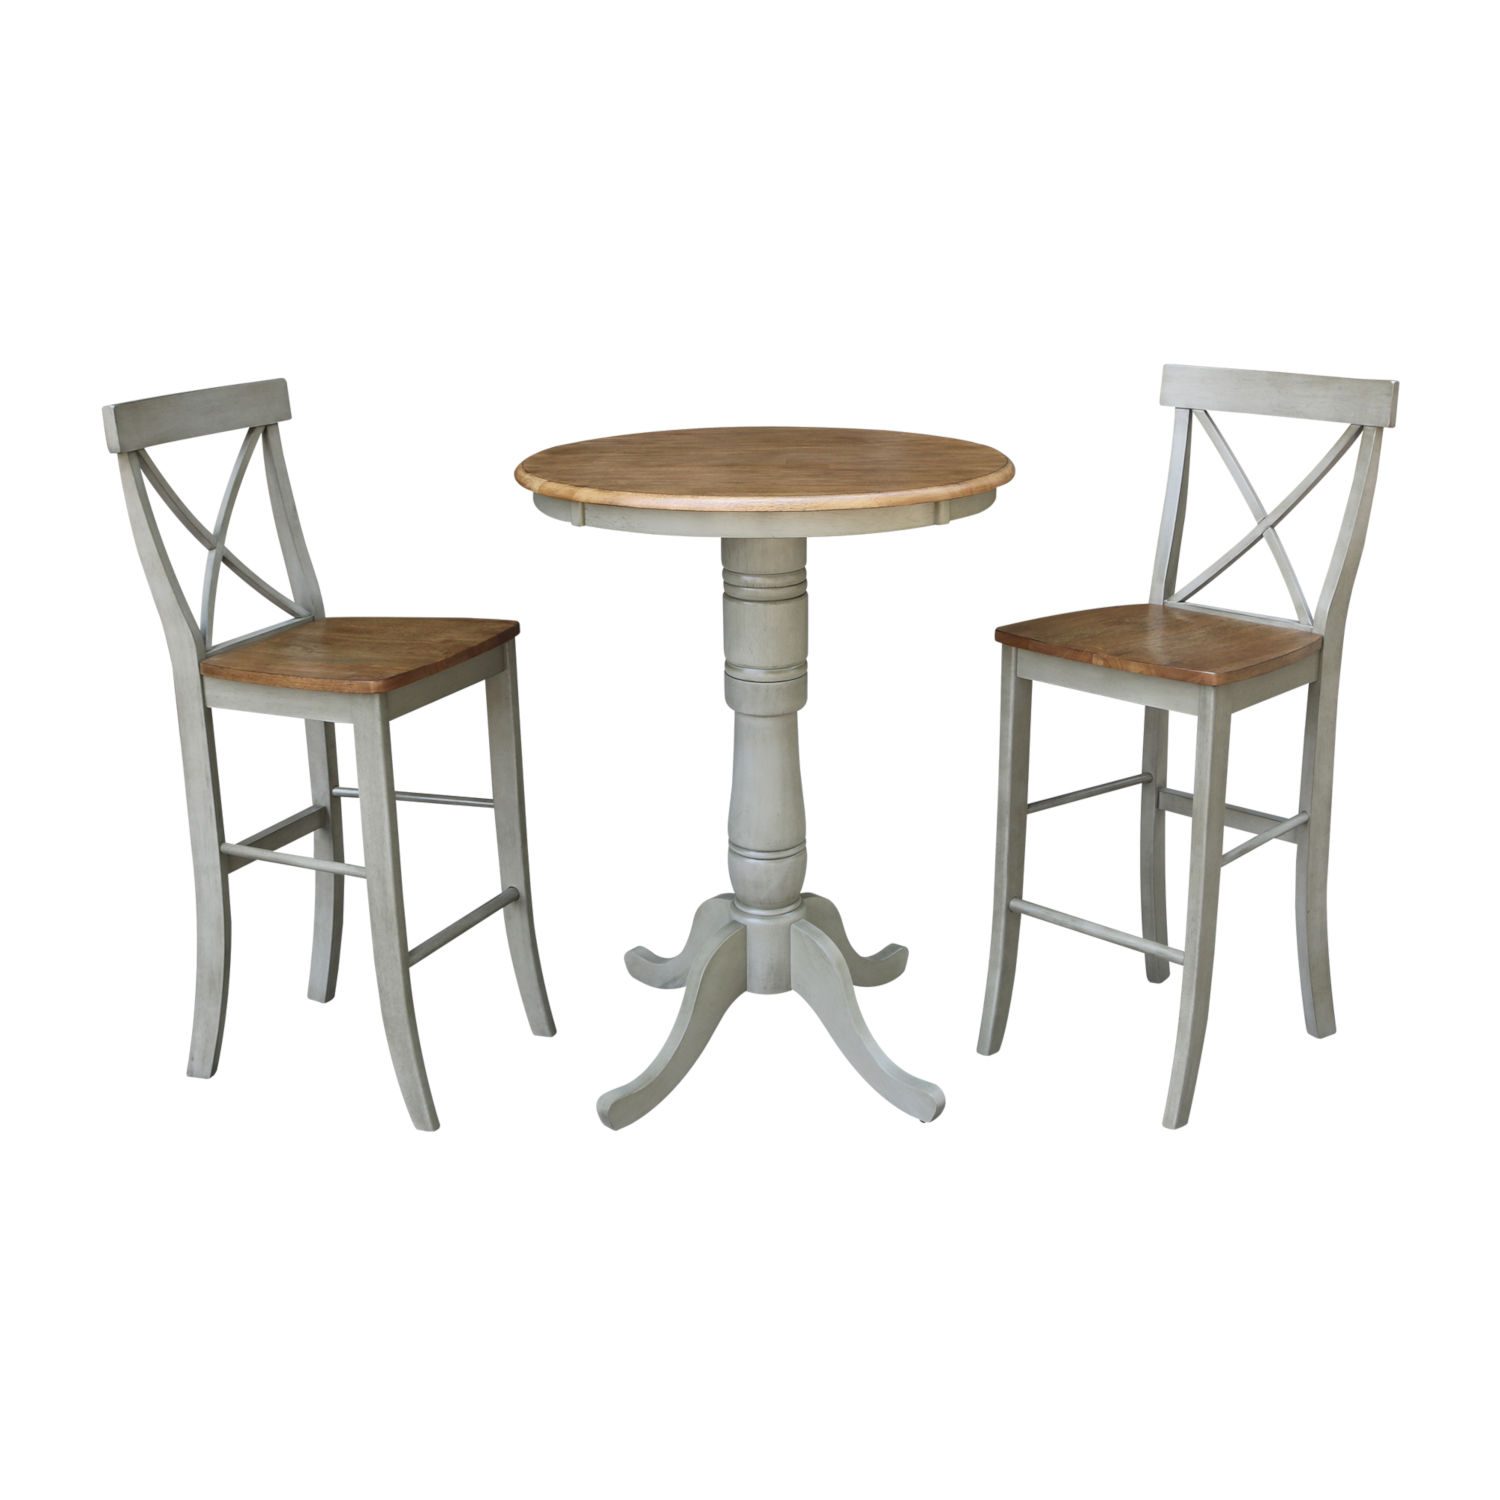 Hickory And Stone 30-Inch Hardwood Round Pedestal Bar Height Table With X-Back Bar Height Stools, Three-Piece